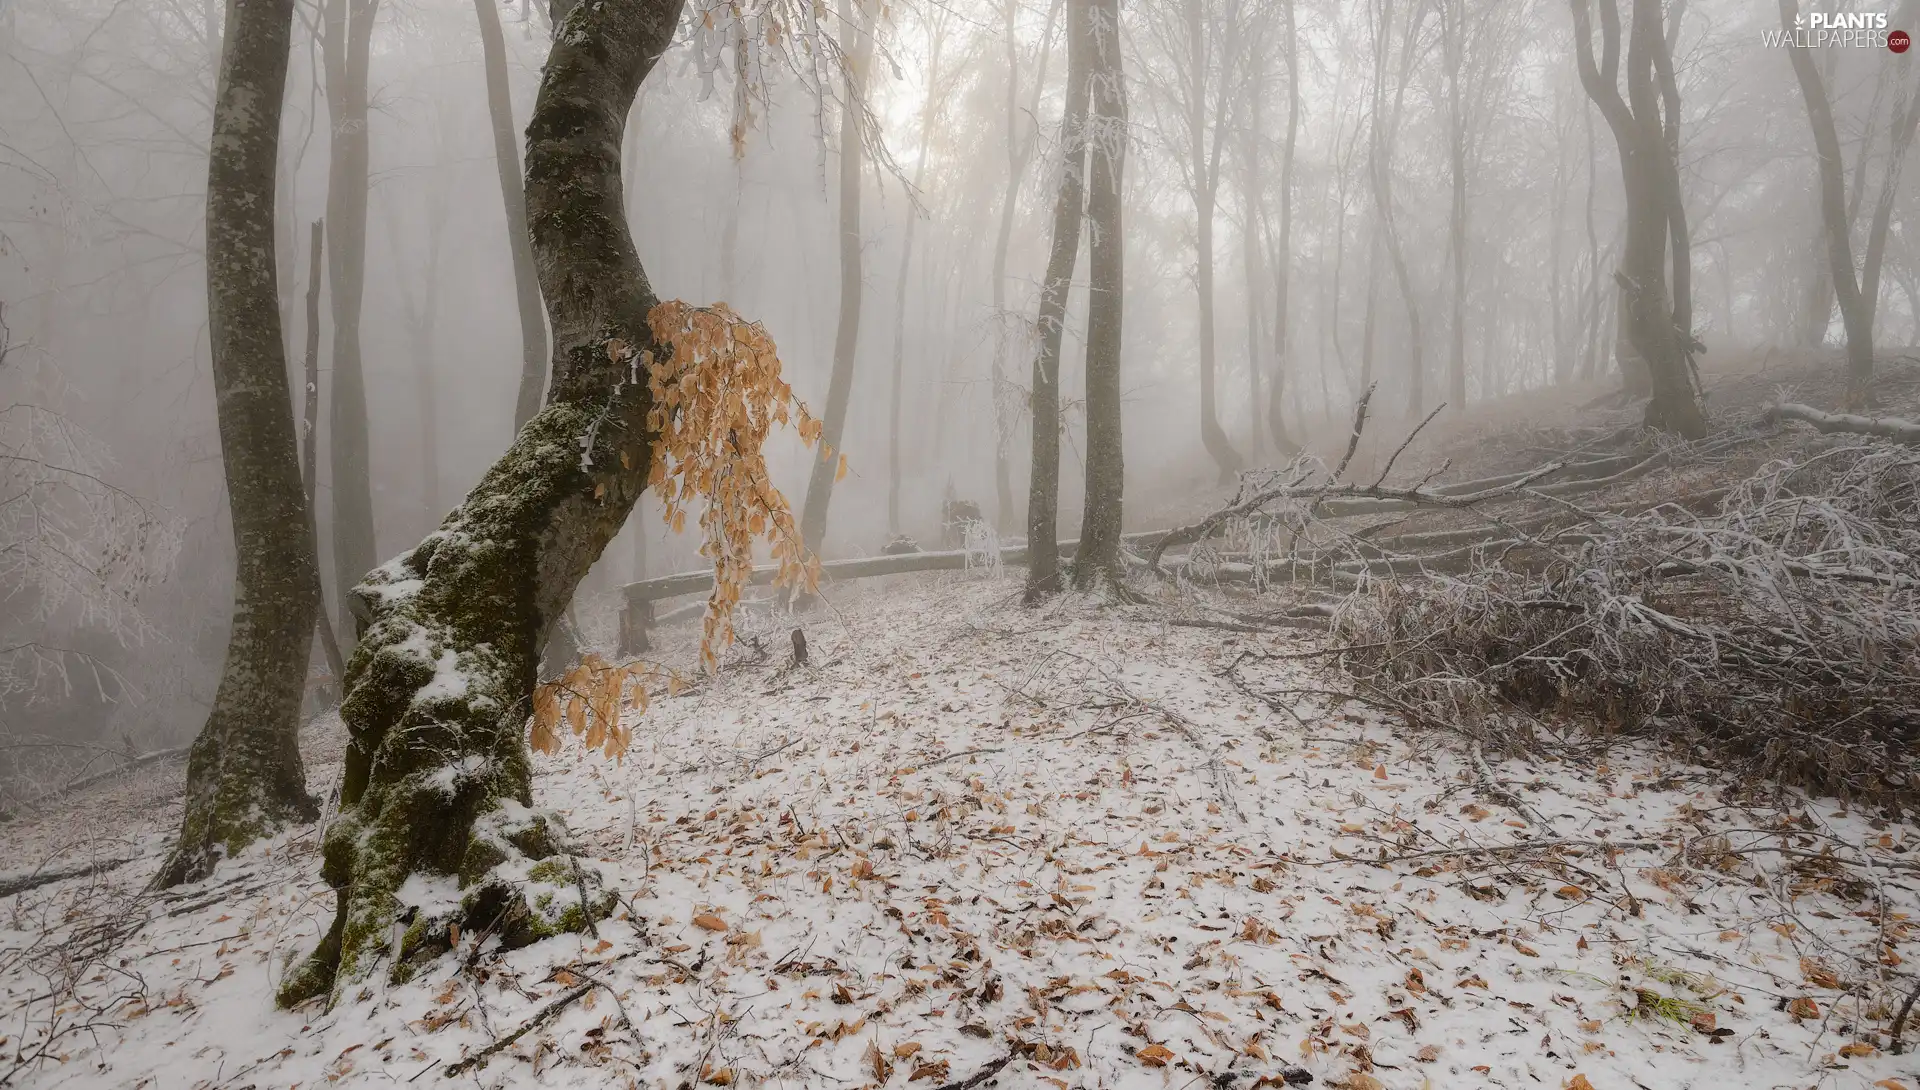 trees, viewes, trees, Fog, overturned, forest, winter, Leaf